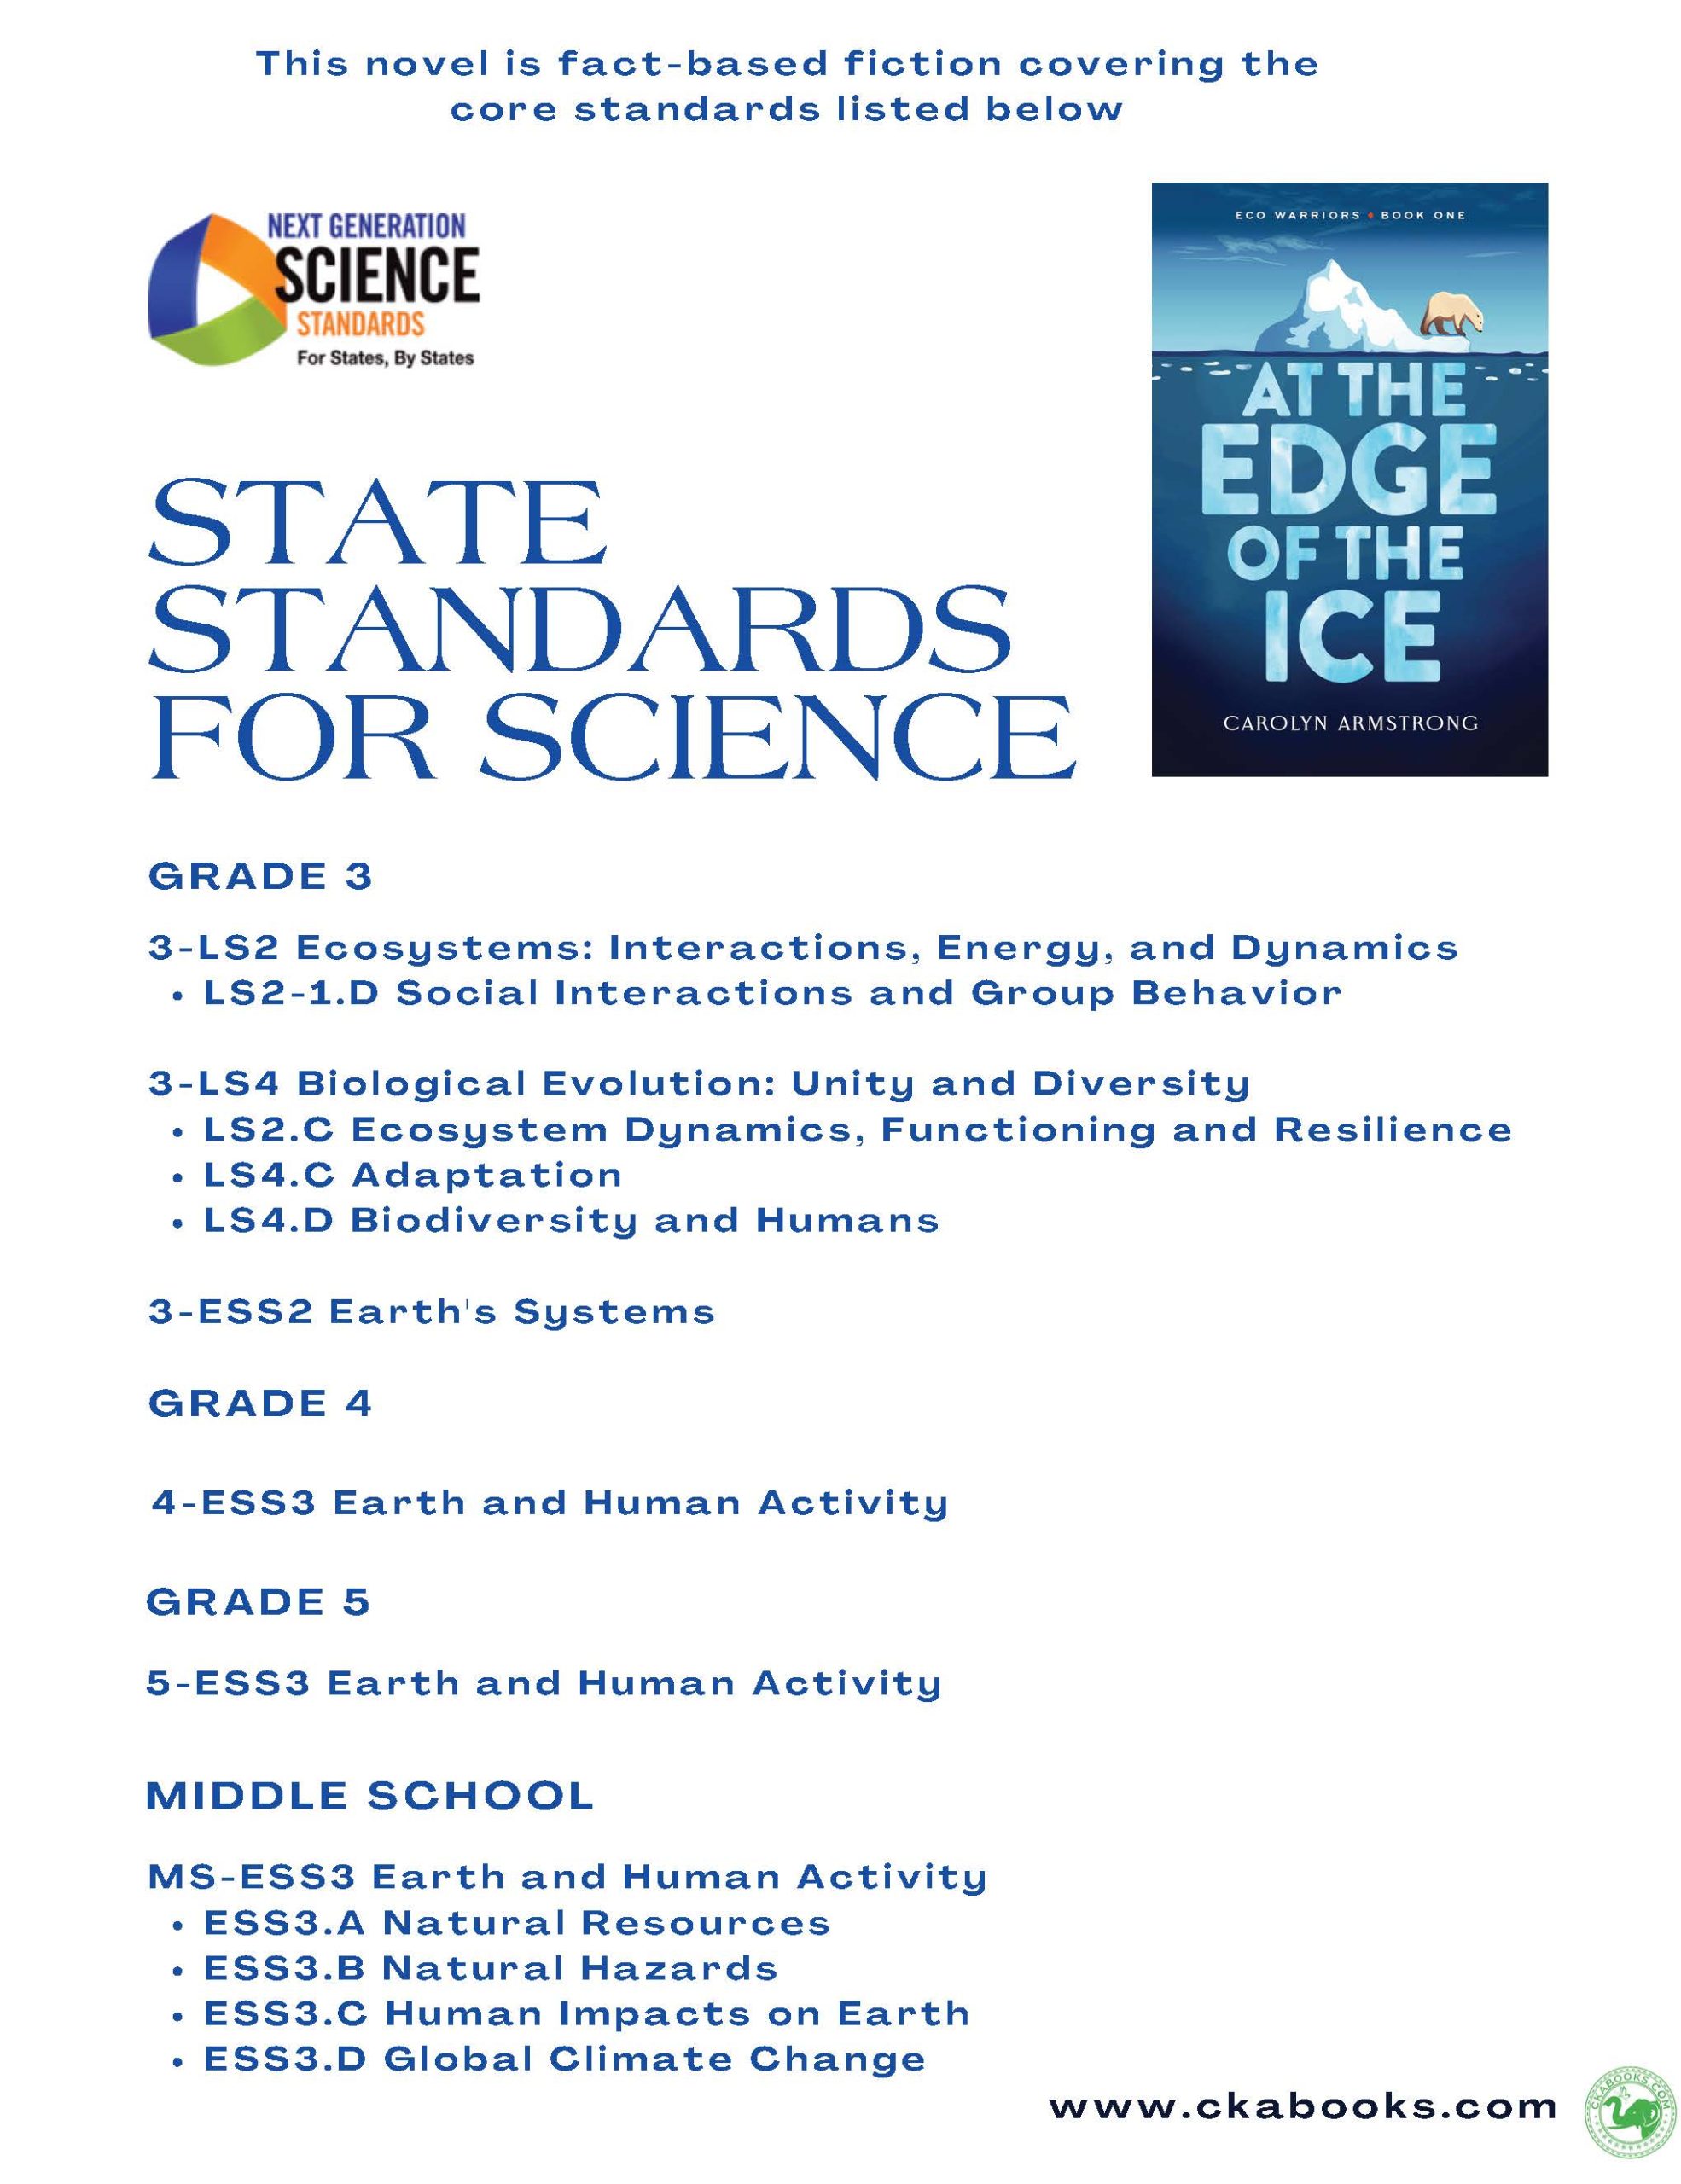 State standards for science that At the Edge of the Ice covers for grades 3 to 6